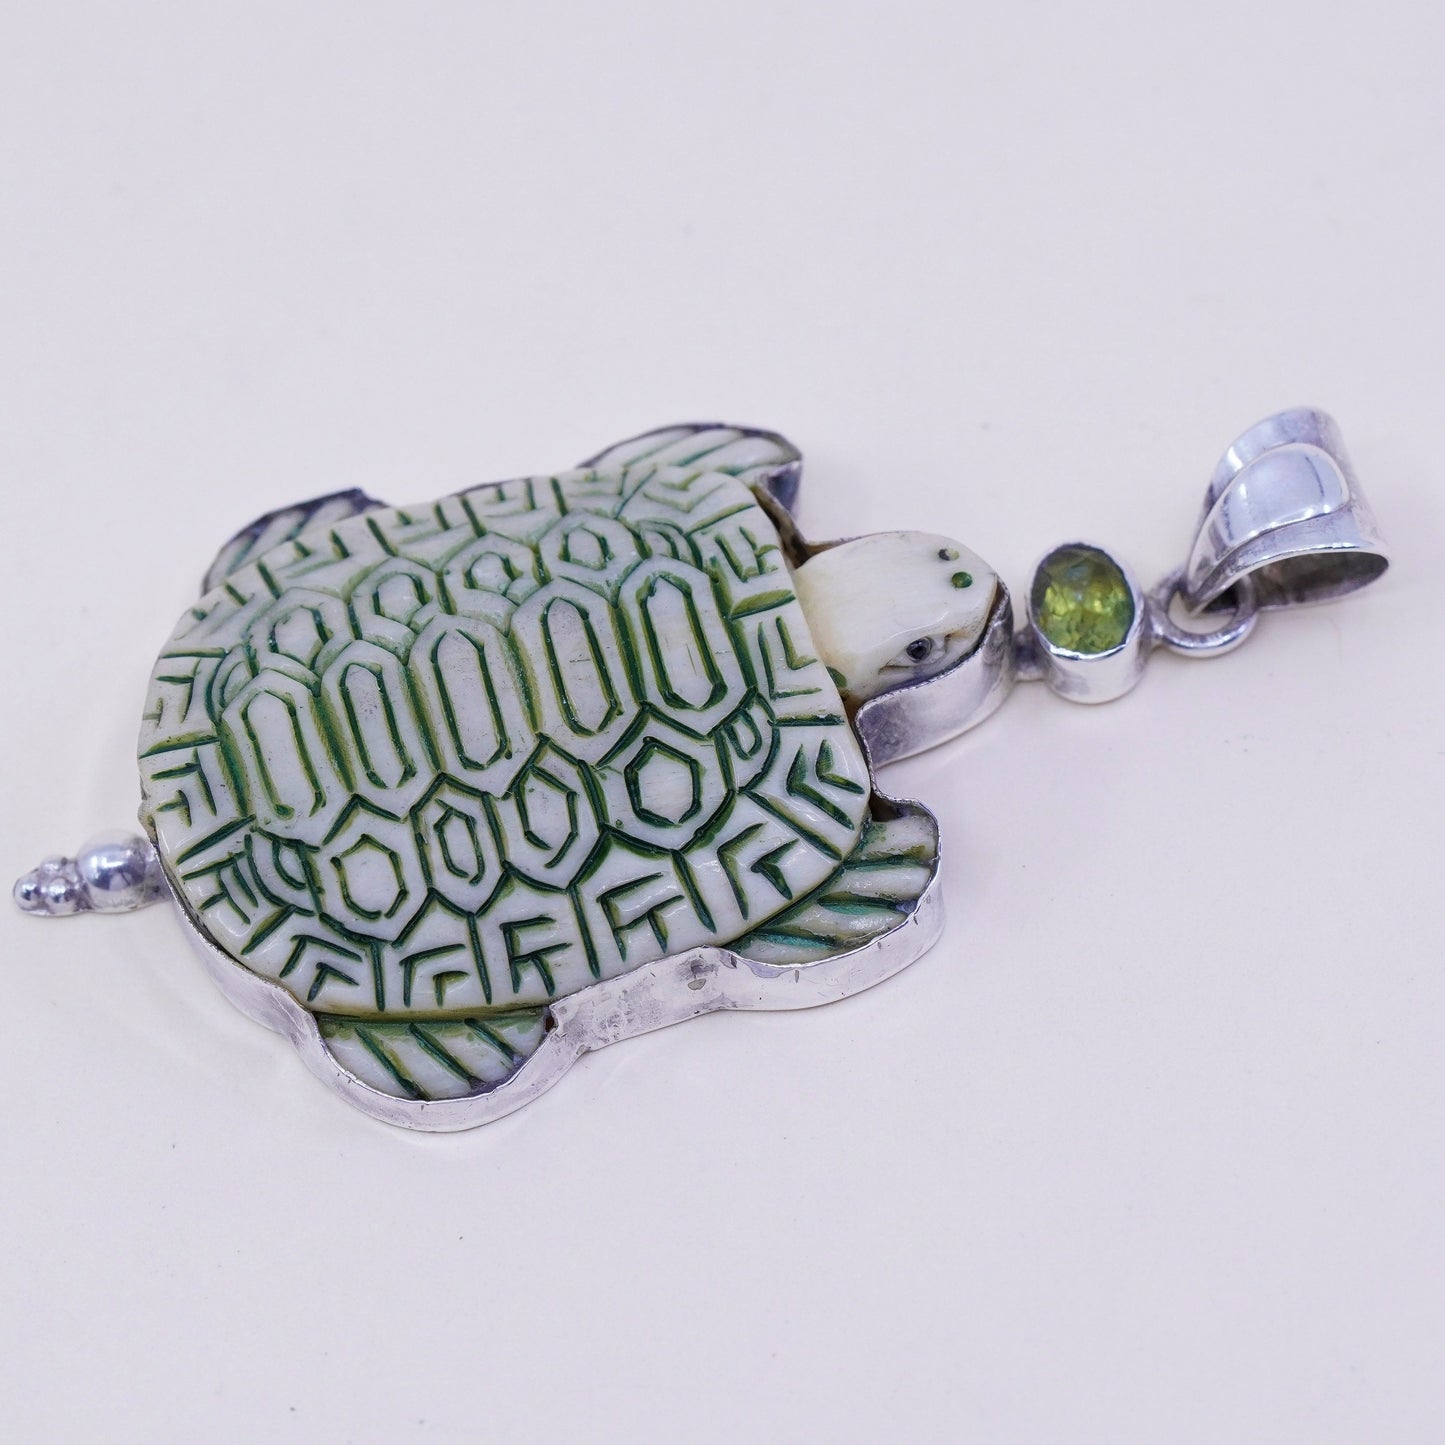 vtg sterling 925 silver handmade pendant with carved bone turtle and peridot